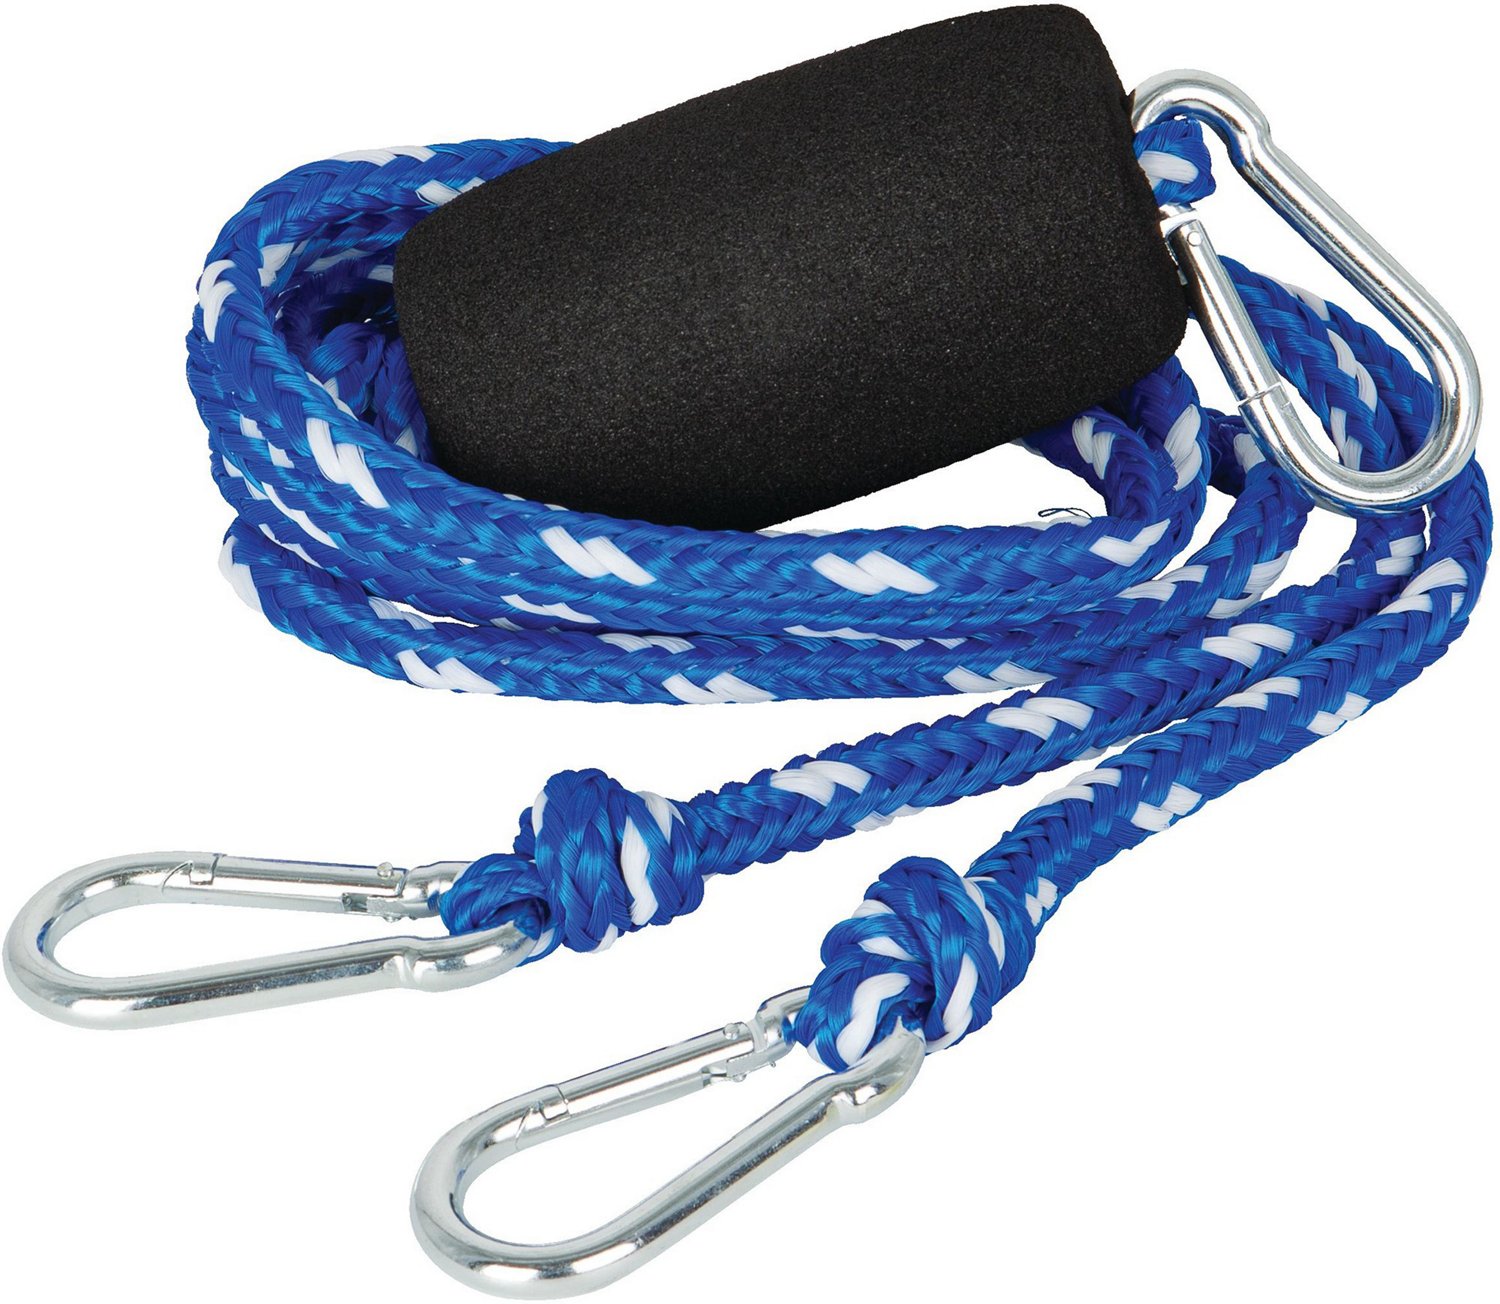 Tow Ropes for Tubing, Air Pumps for Inflatables & more